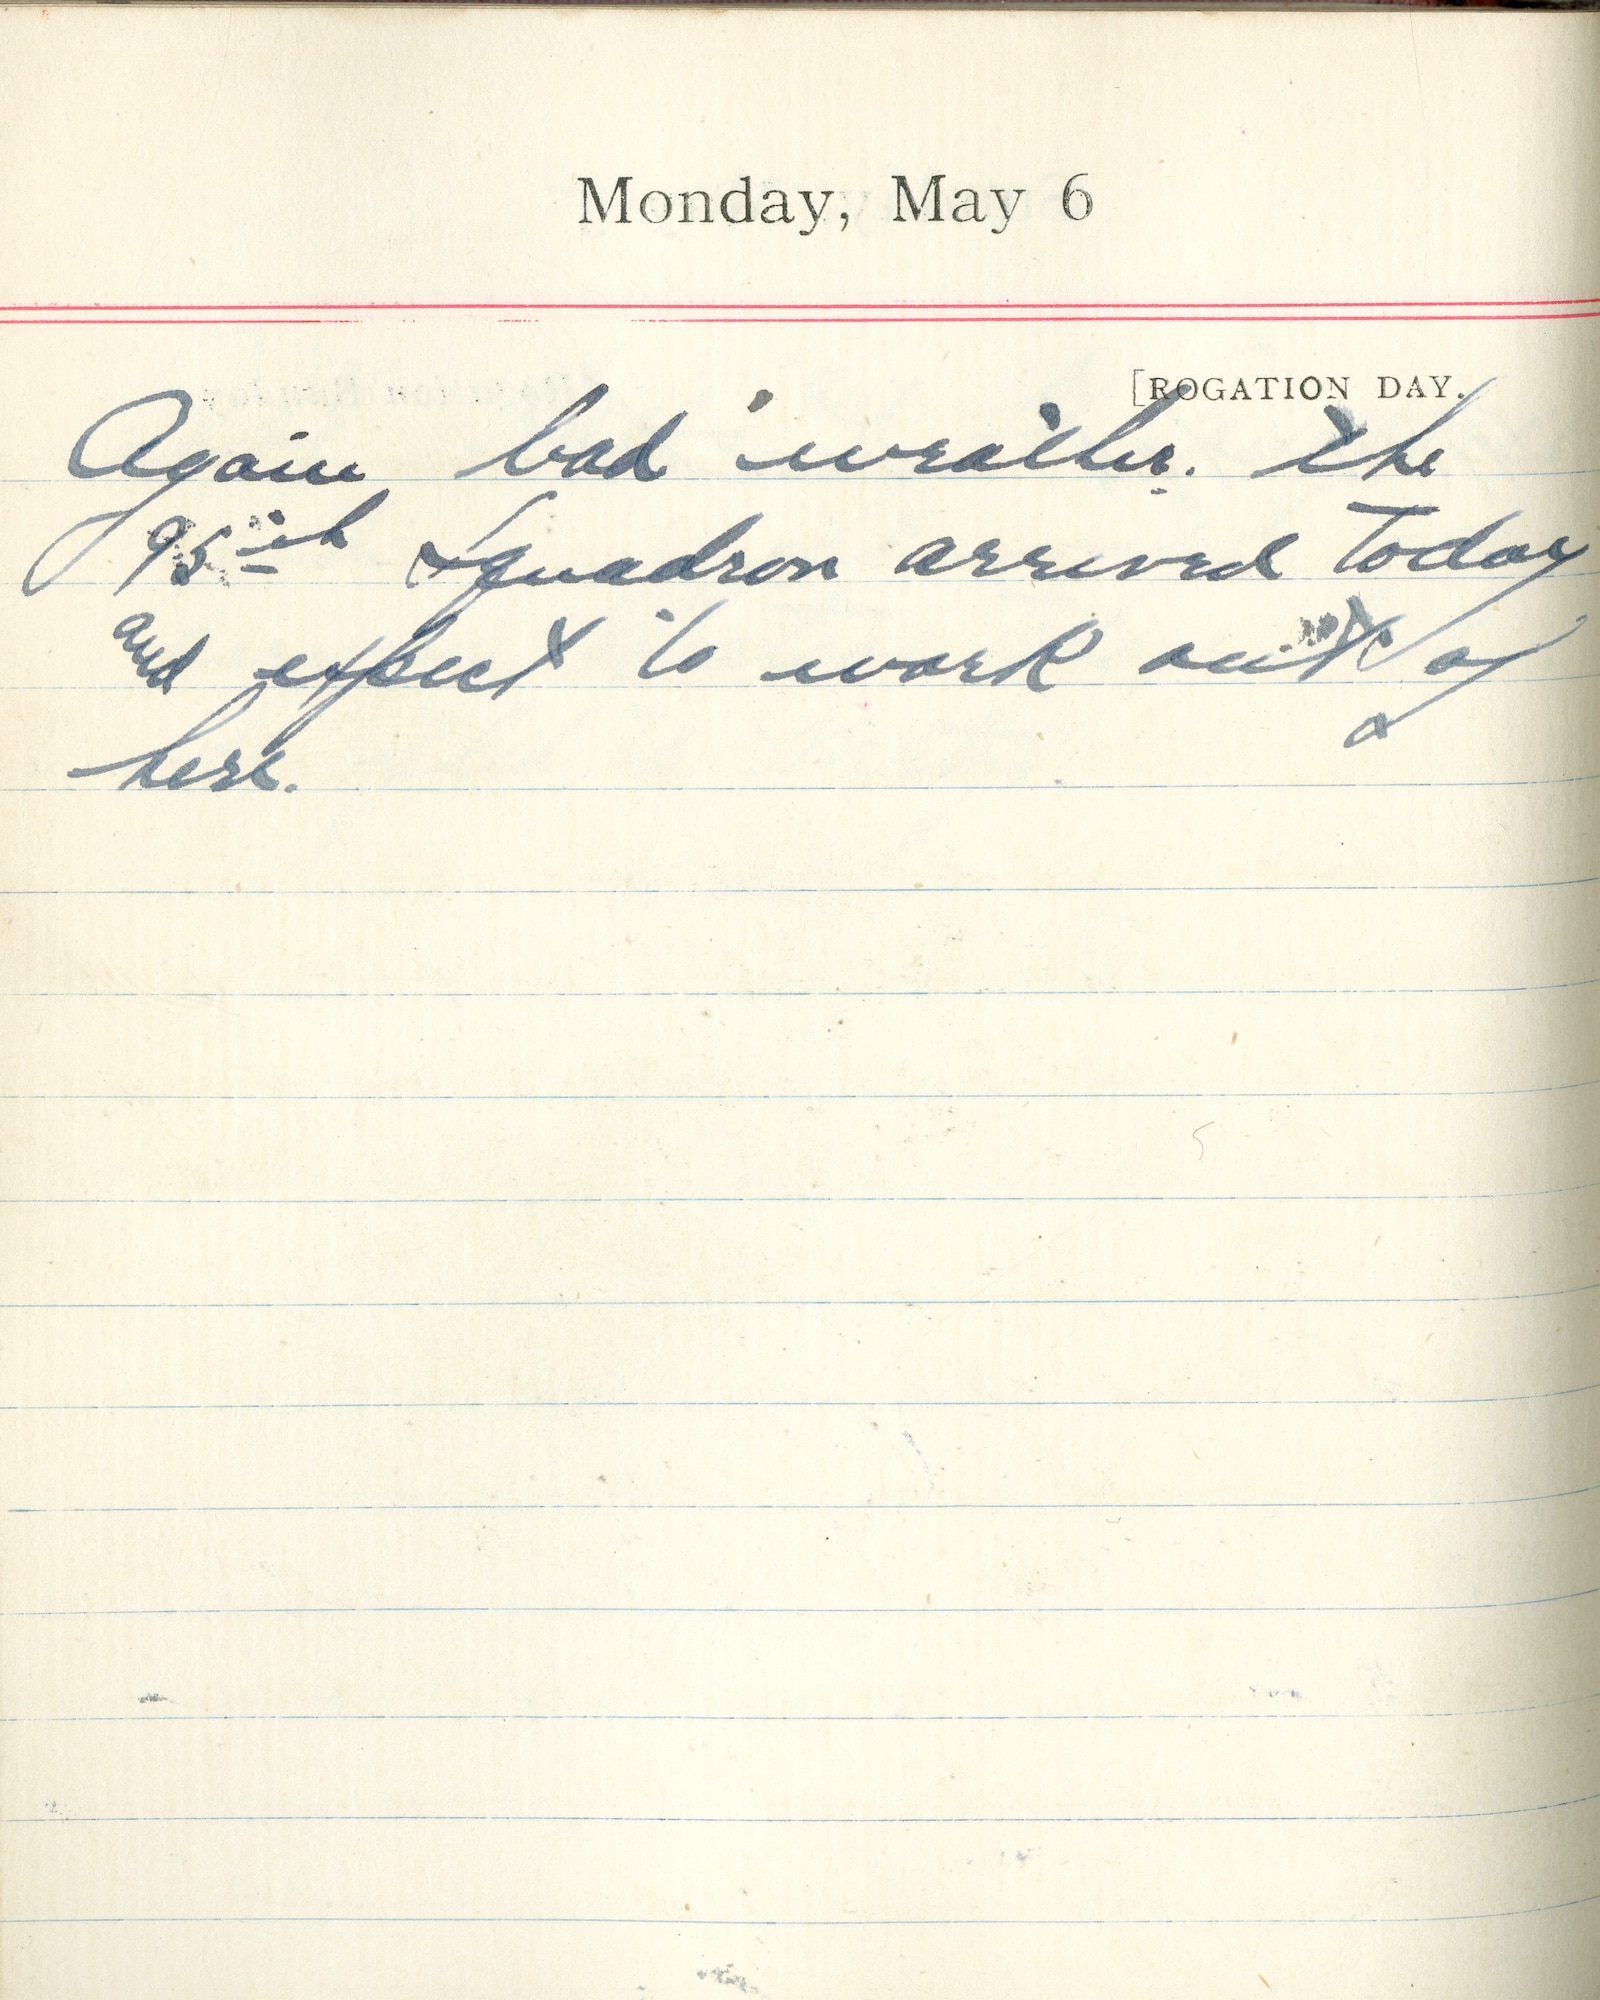 Capt. Edward V. Rickenbacker's 1918 wartime diary entry. (05/06/1918).

Again bad weather.  The 95th Squadron arrived today and expect to work out of here.